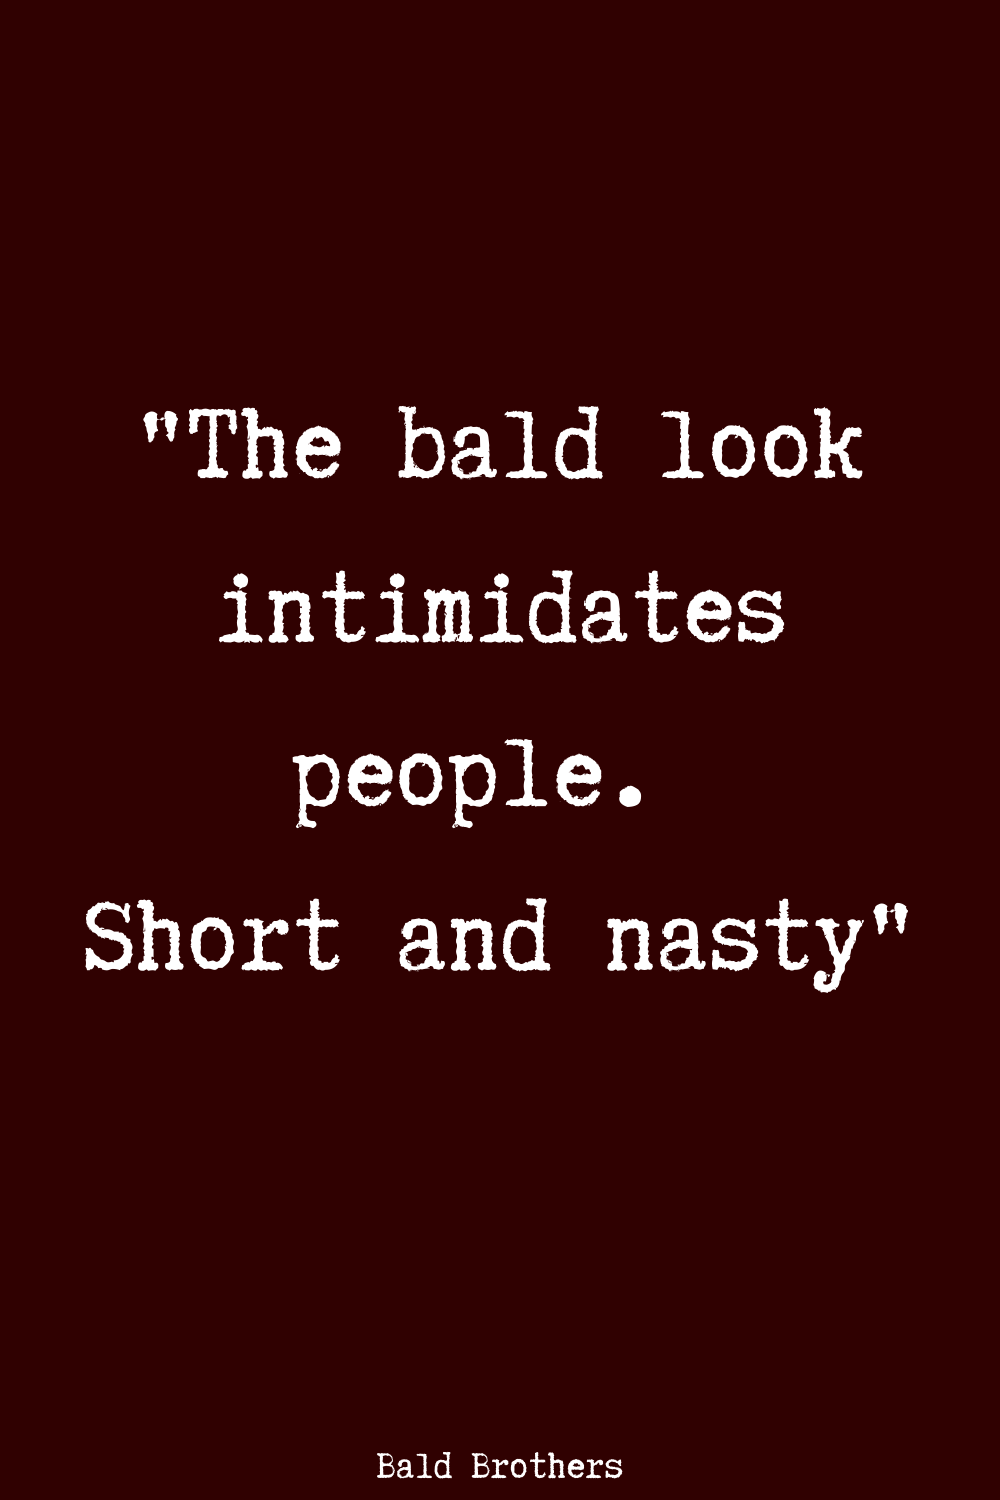 20 Bald Quotes Every Bald Man Needs To See - 20 Bald Quotes Every Bald Man Needs To See -   16 style Quotes man ideas